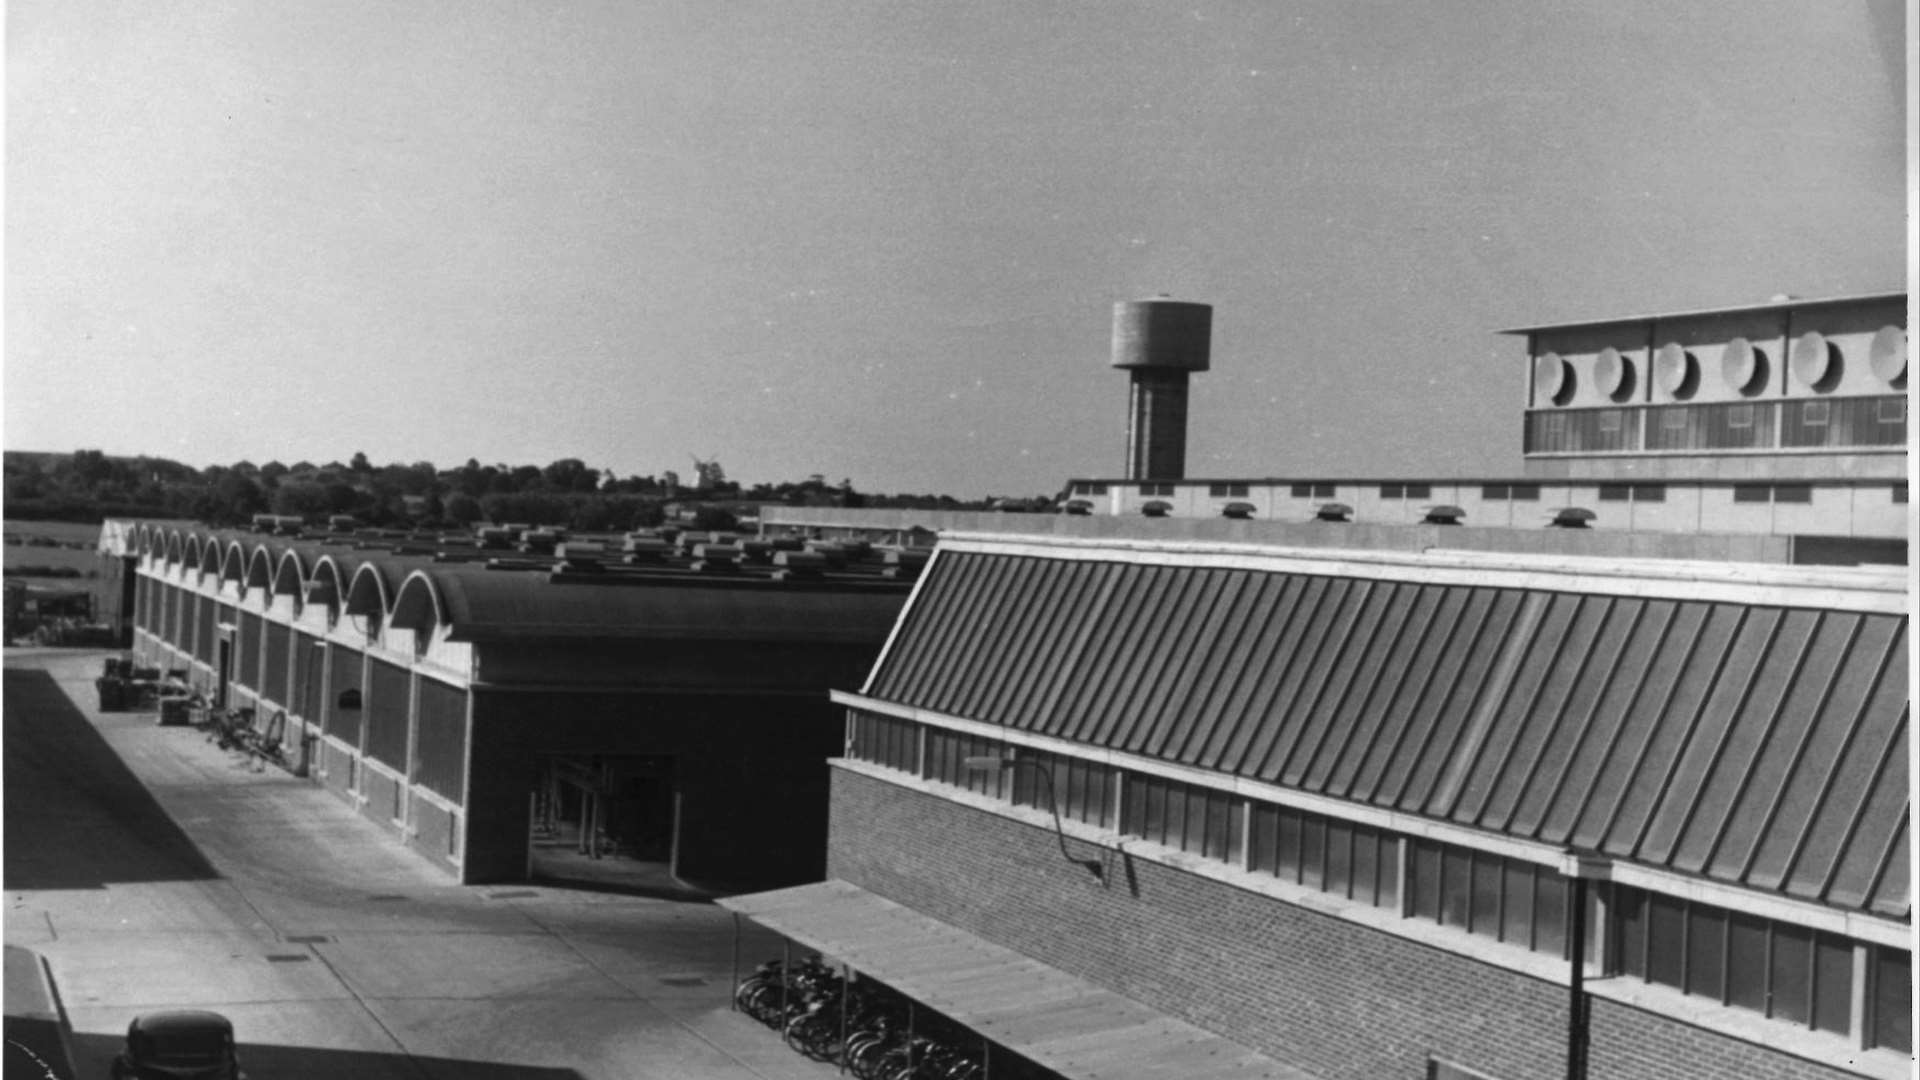 The complete building complete shown just before the opening in 1957